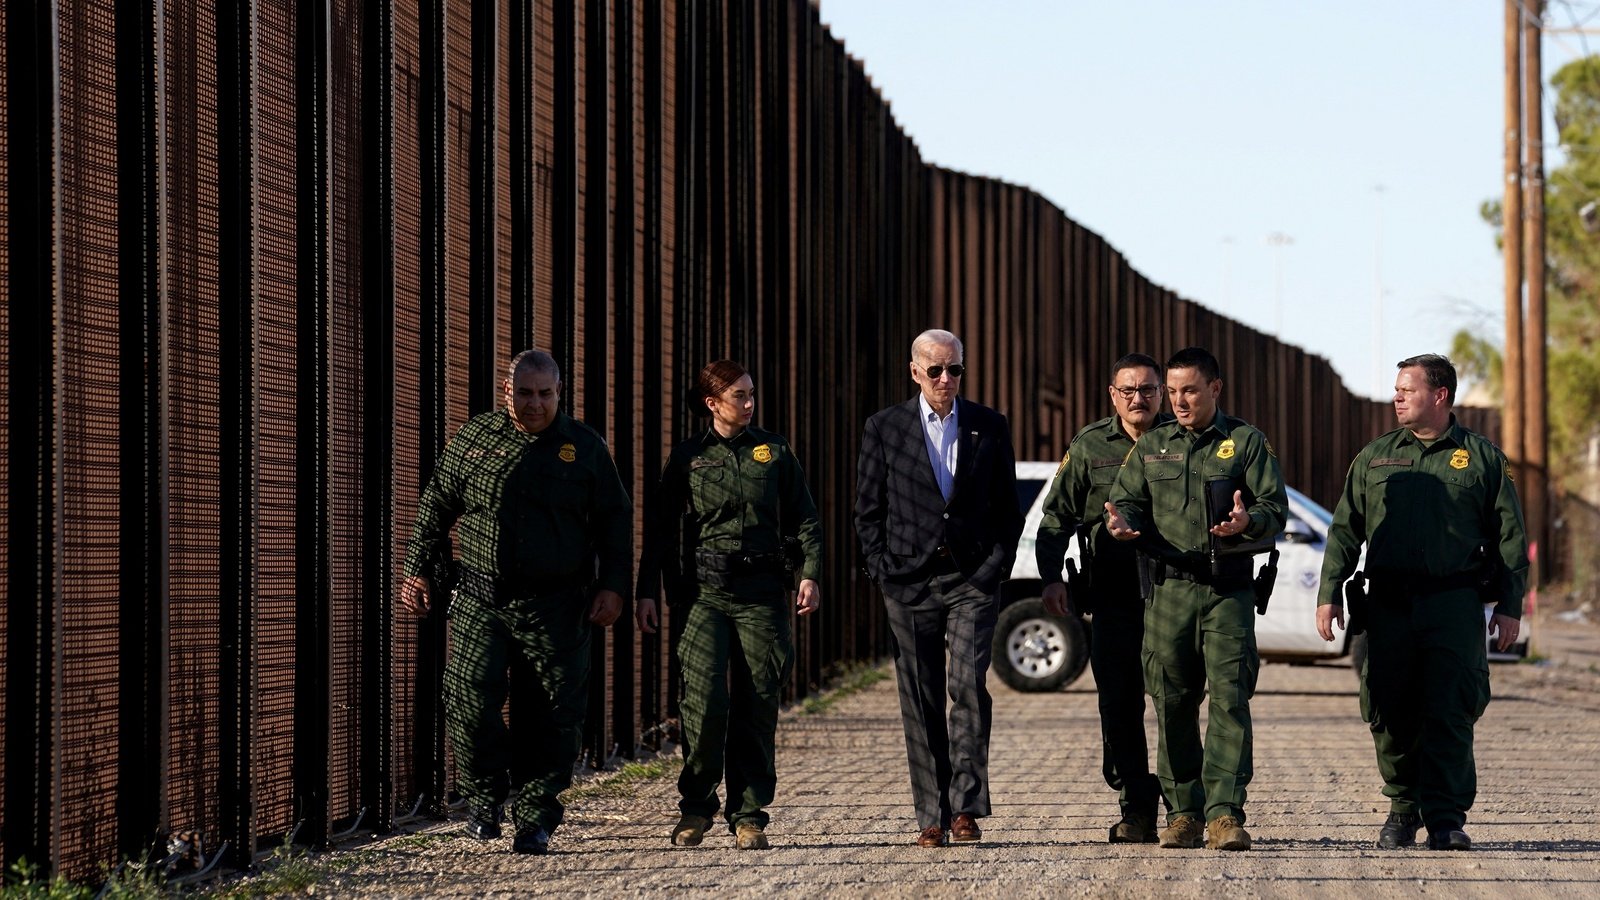 Documents Shed Light on Border Patrol's Expansive Authority